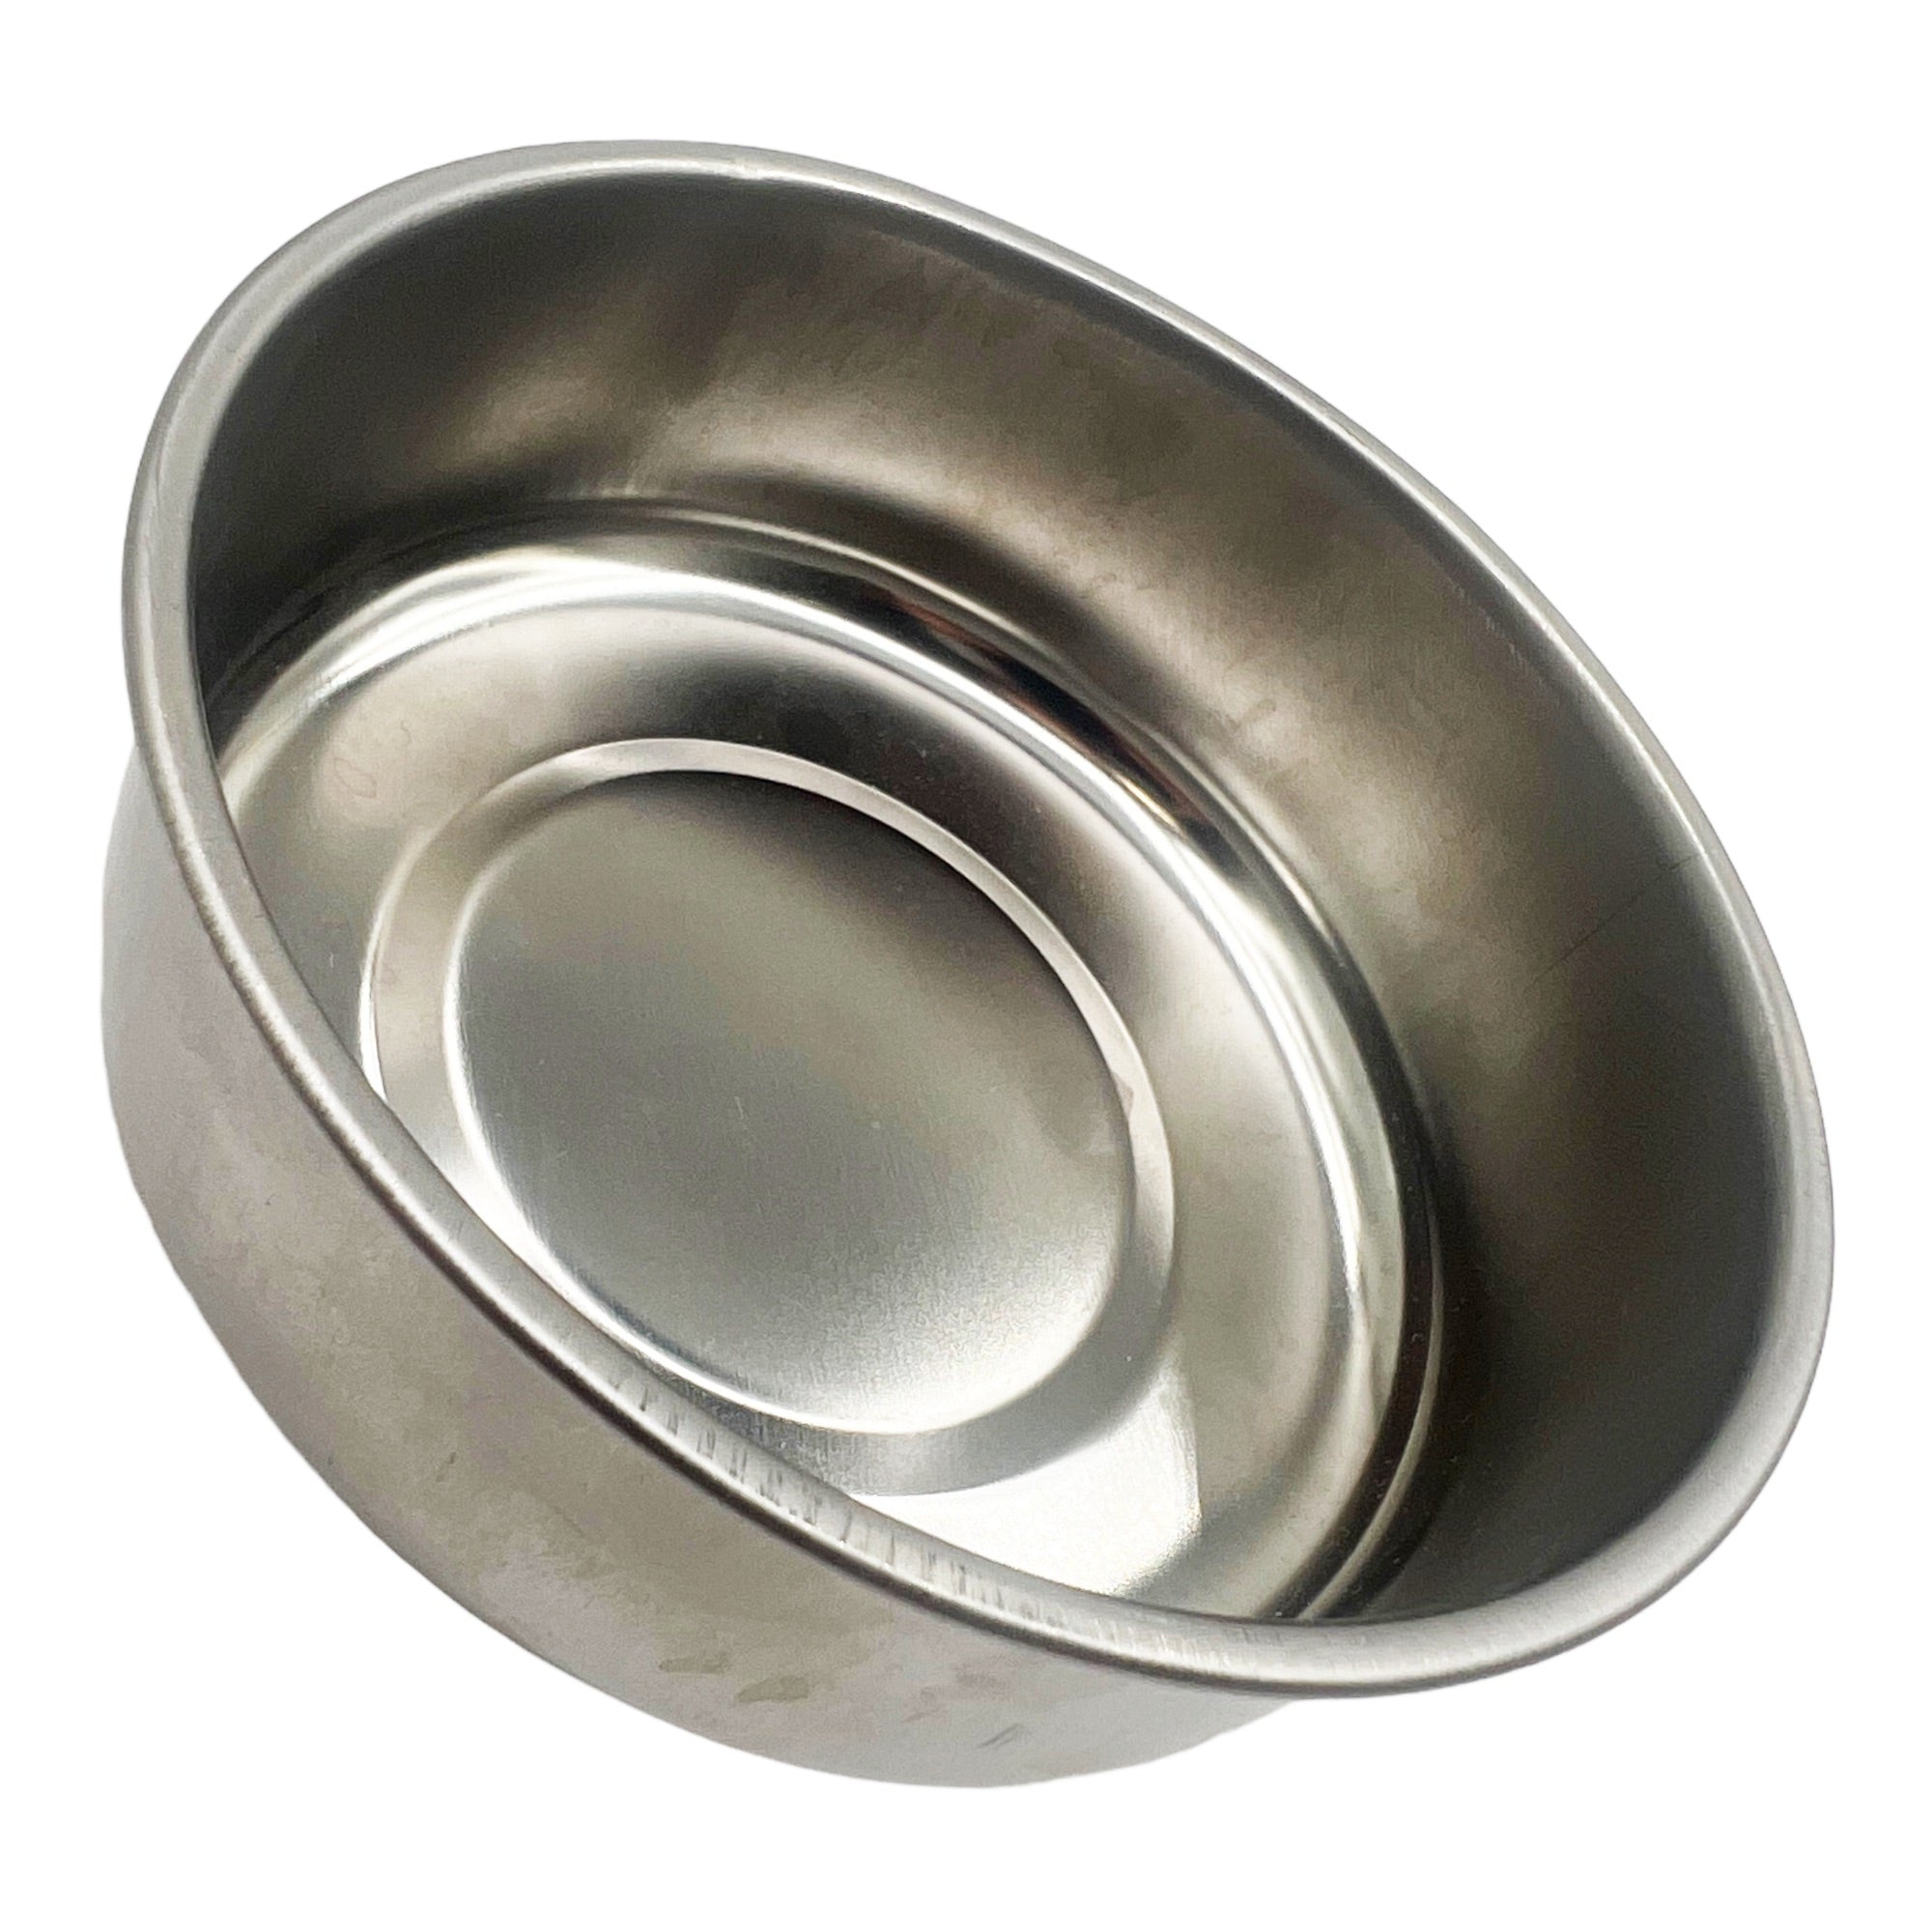 Eson - Stainless Steel Shaving Bowl 3.5x10cm - Eson Direct